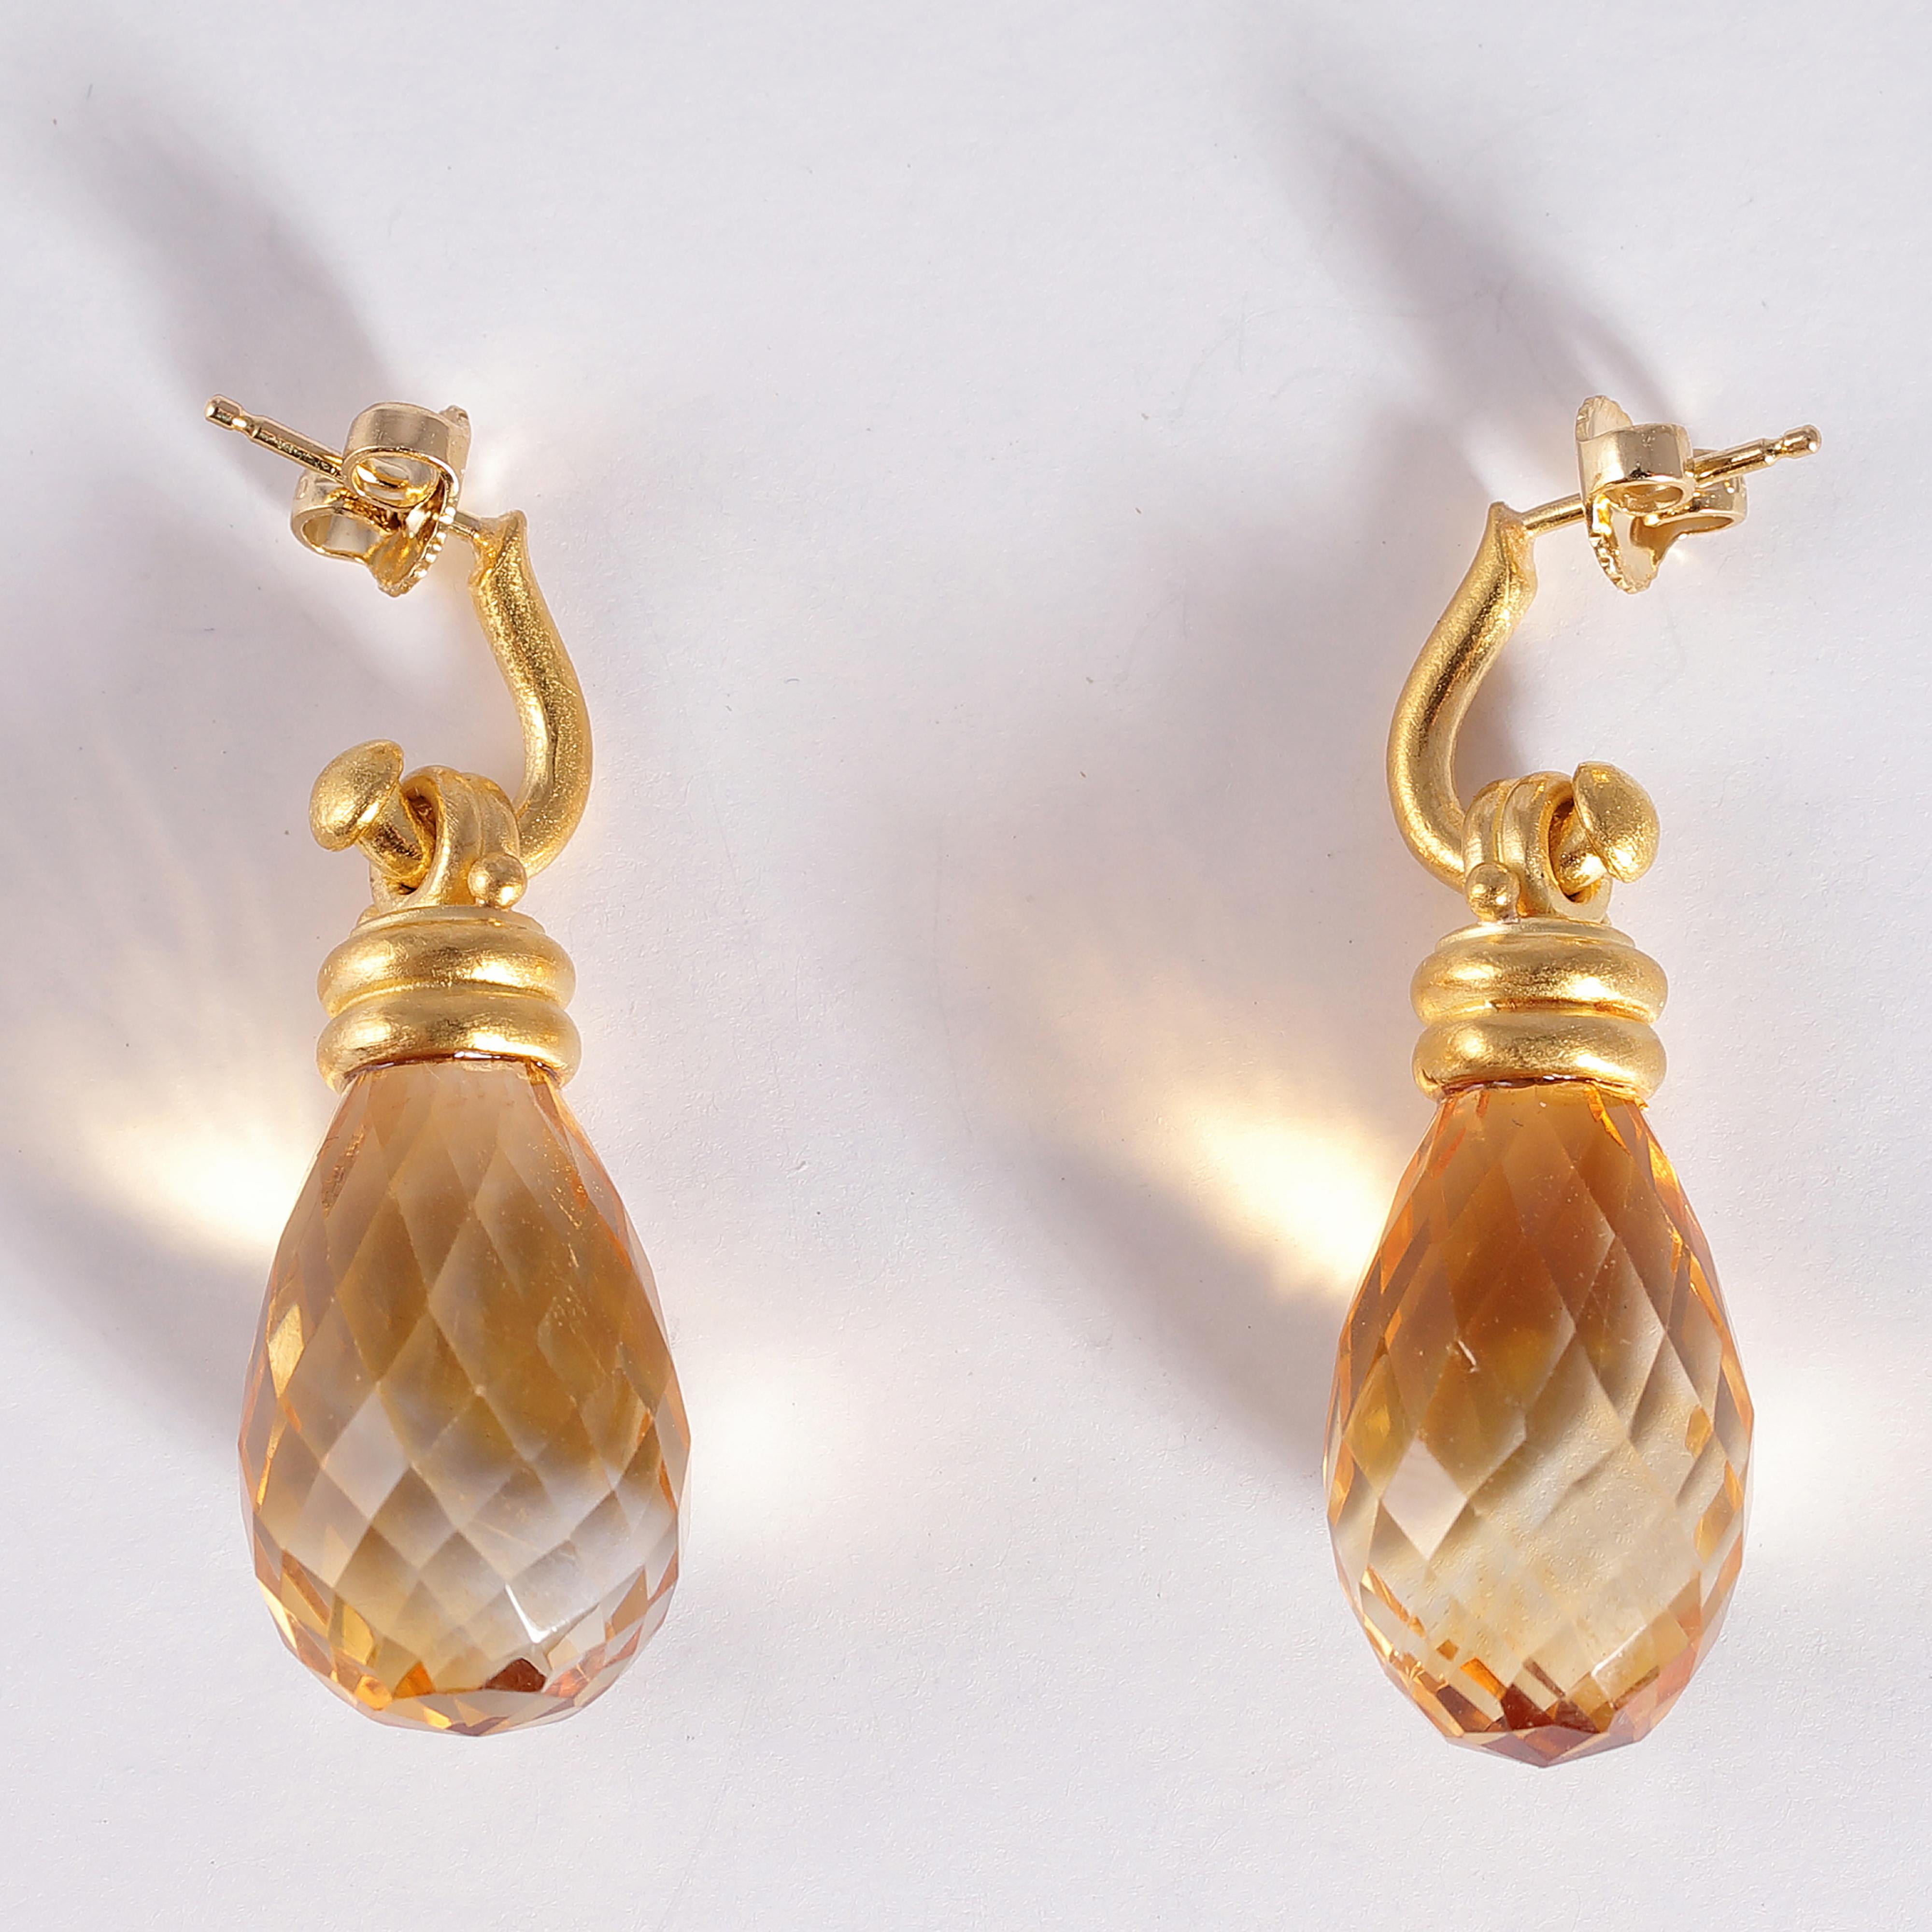 Beautiful and light!  In 18 karat yellow gold with briolette-cut citrines, secured a standard friction back.  